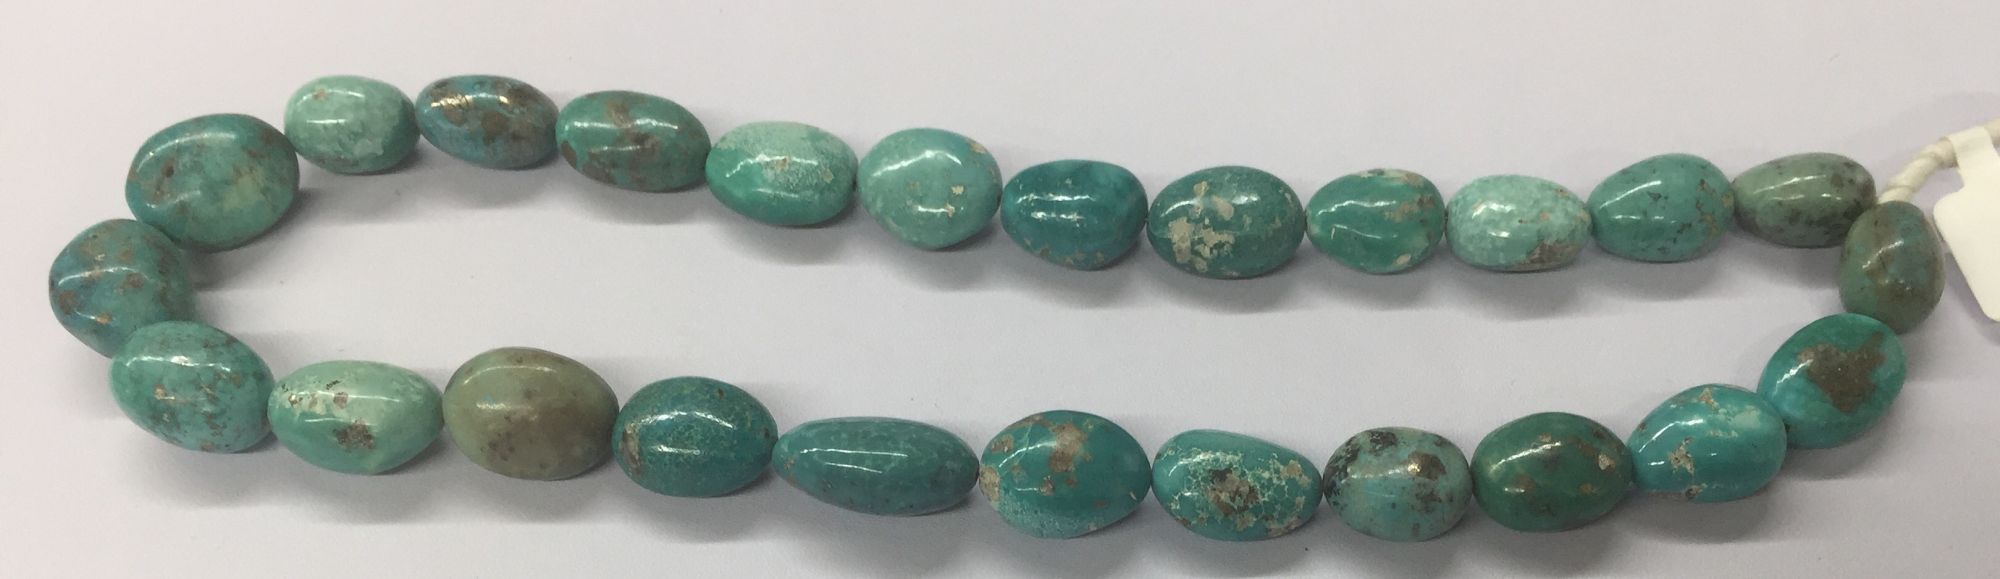 Chrysocolla Nuggets Smooth